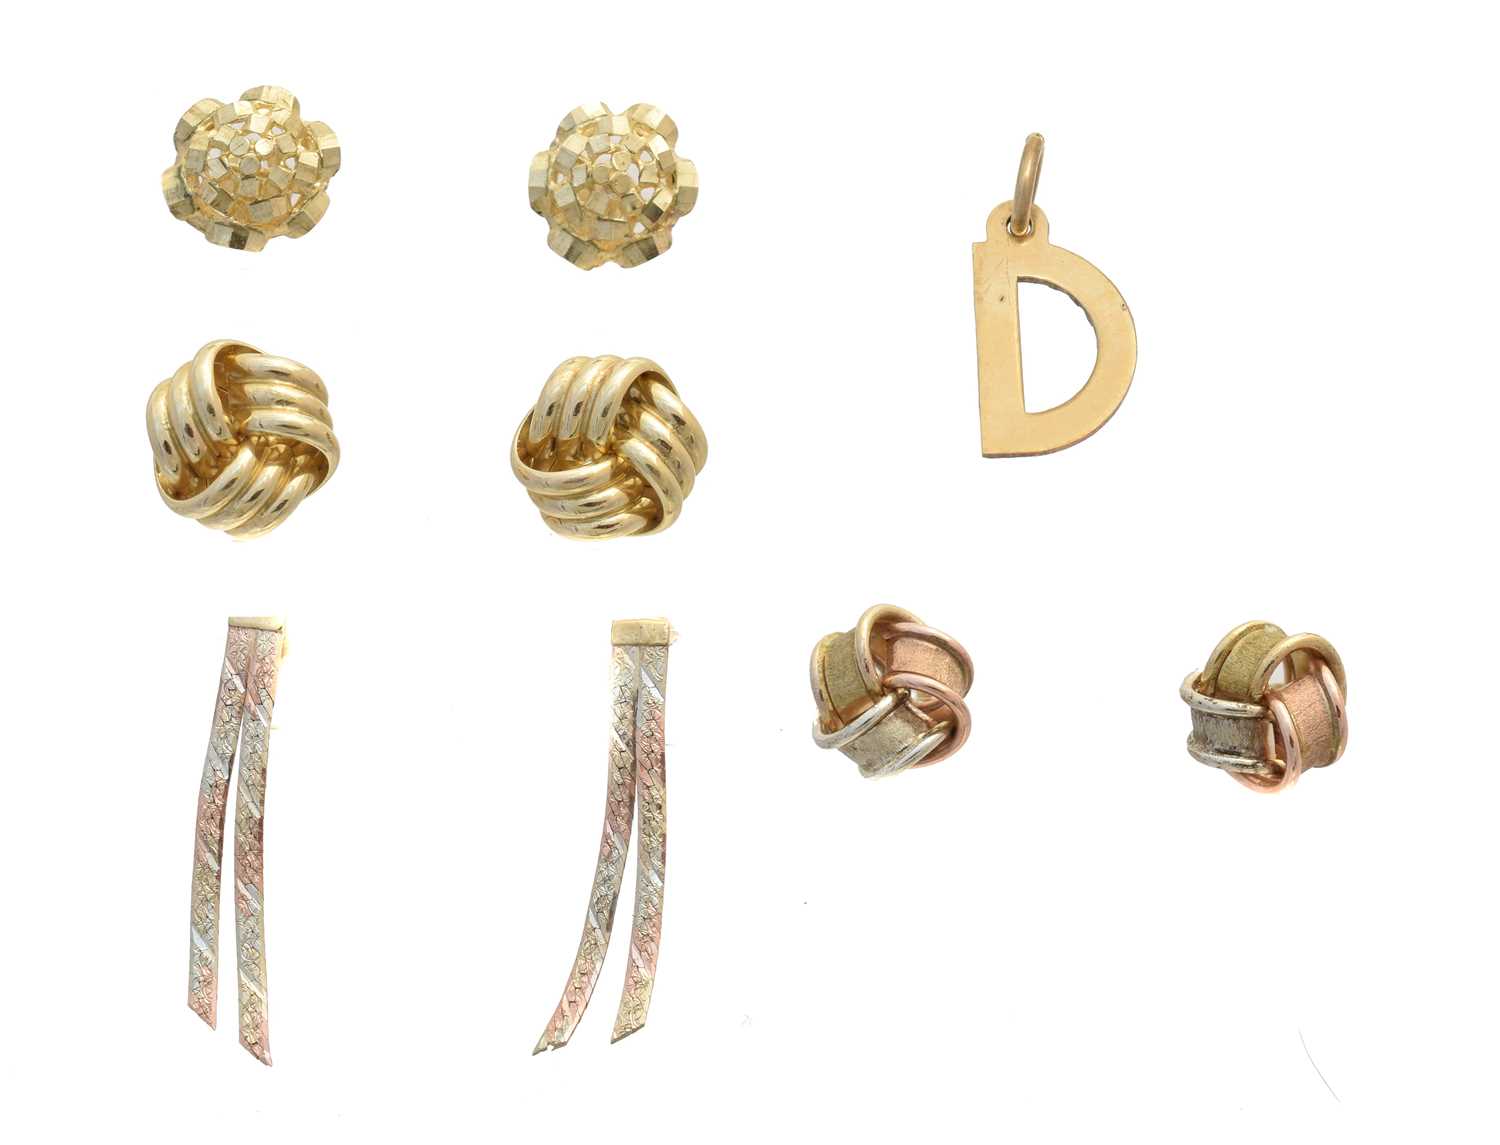 Lot 21 - Four pairs of 9ct gold earrings and a D charm